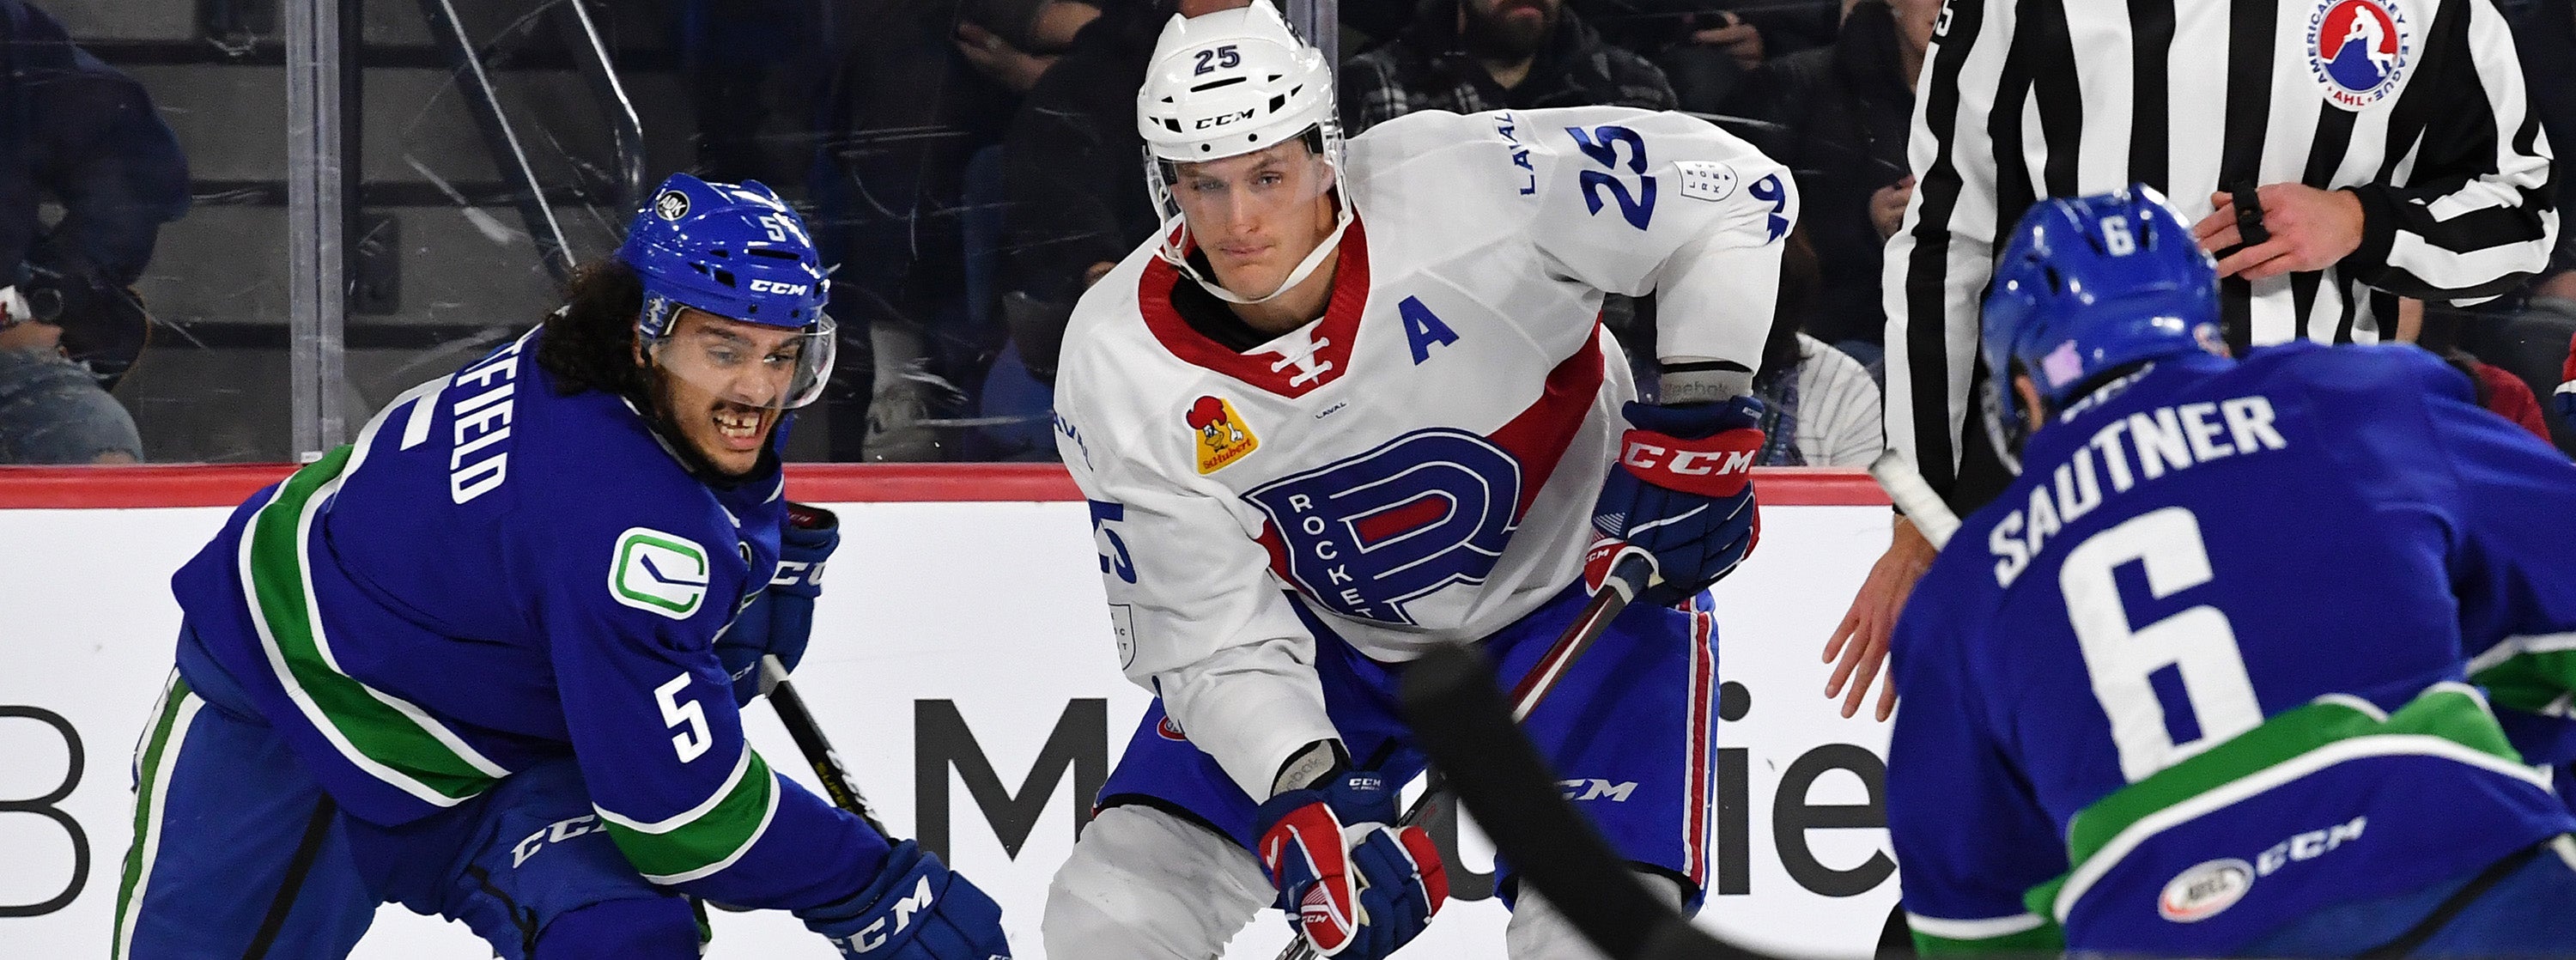 COMETS GROUNDED BY ROCKET IN LAVAL